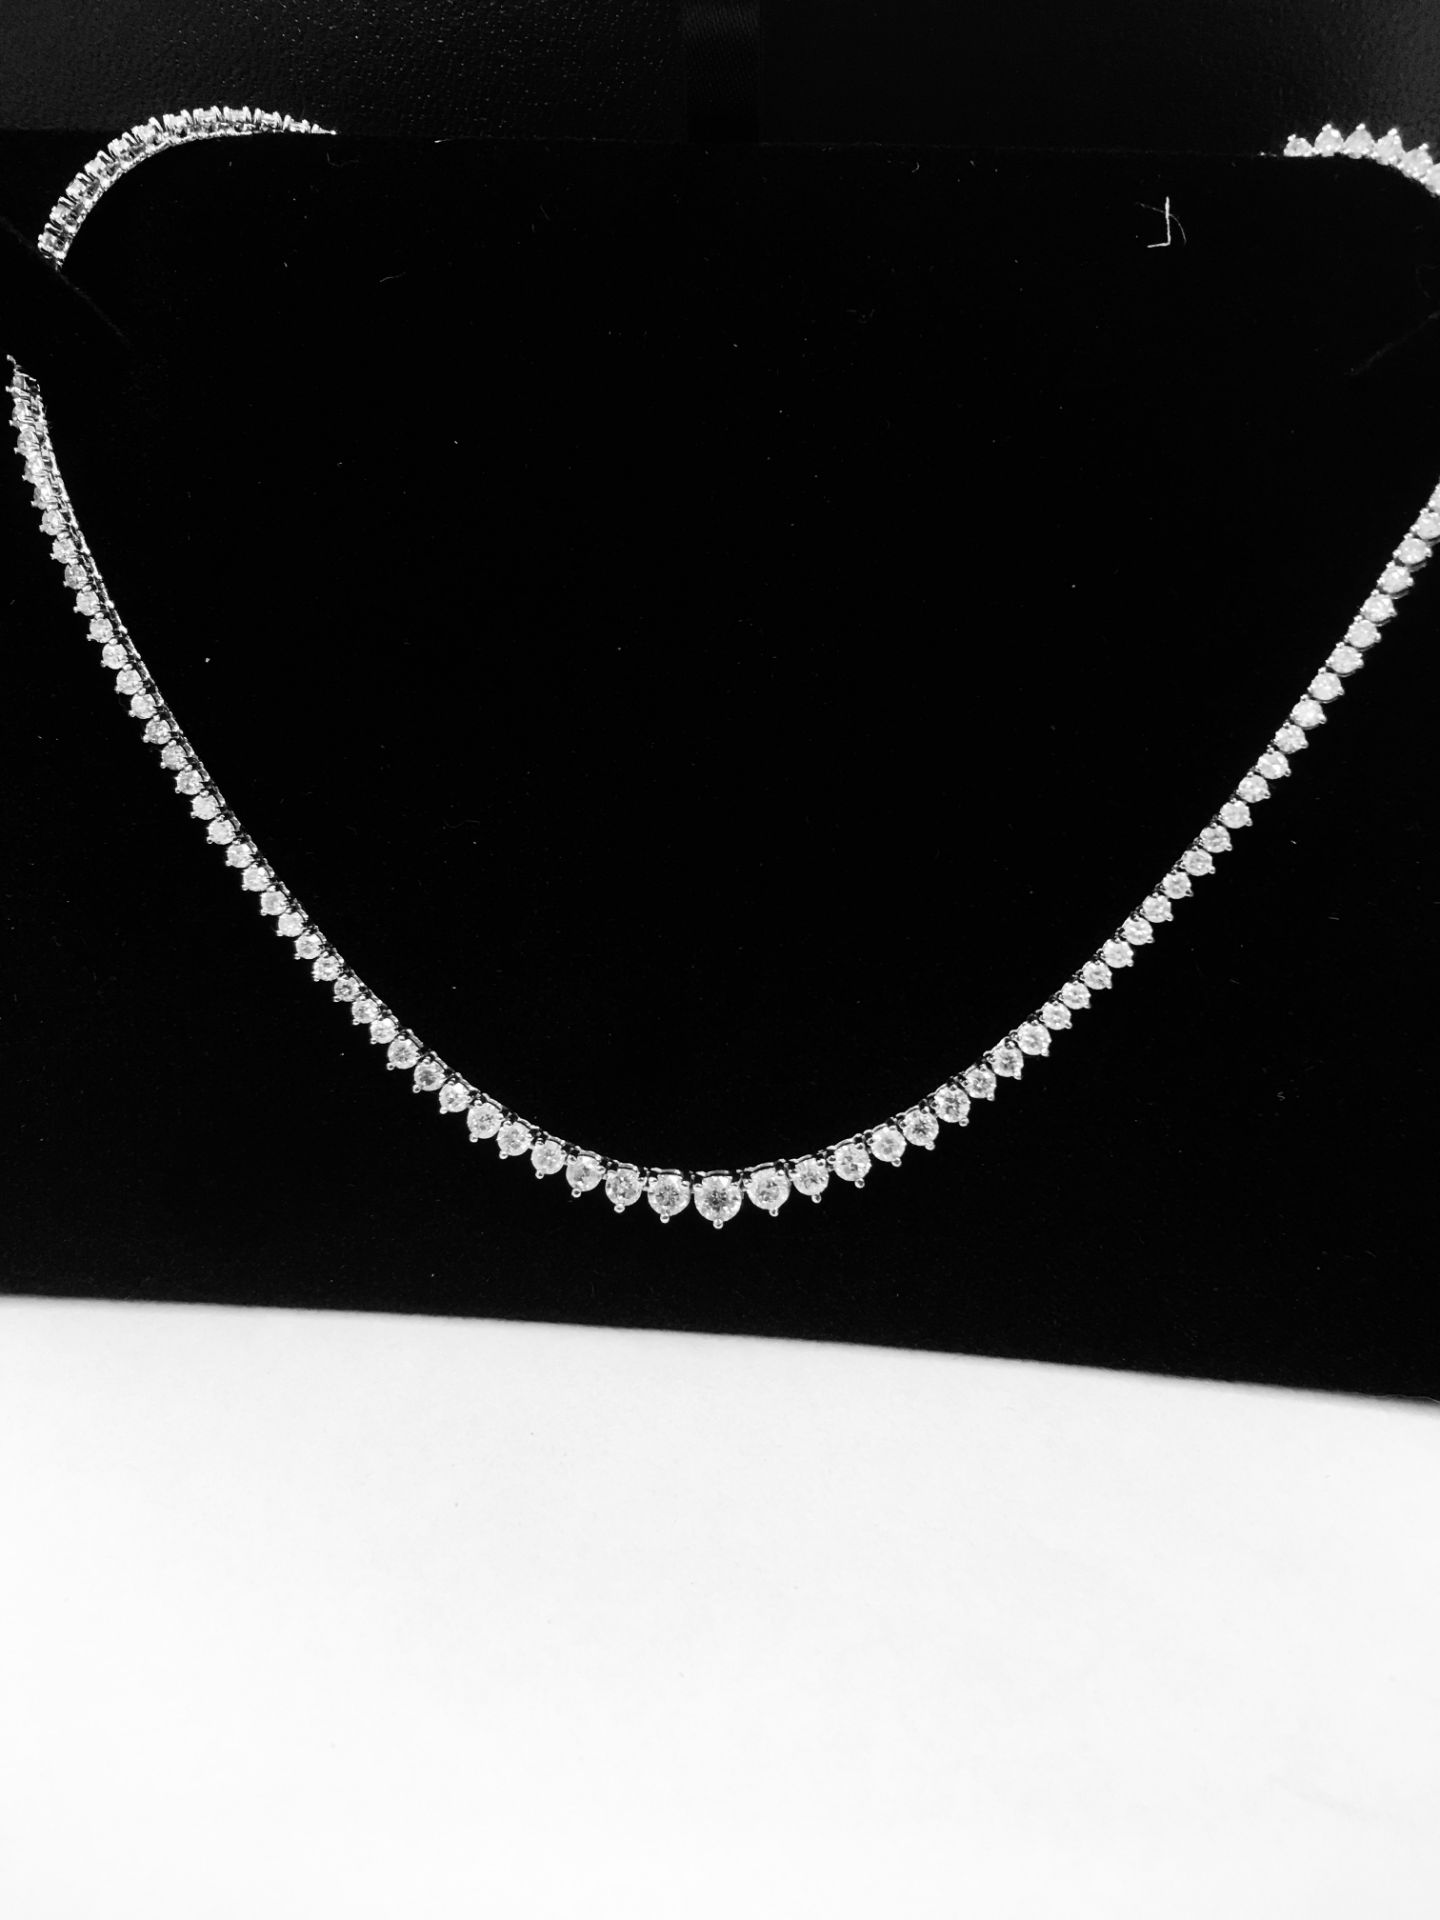 6.50ct Diamond tennis style necklace. 3 claw setting. Graduated diamonds, I colour, Si2 clarity - Image 3 of 5